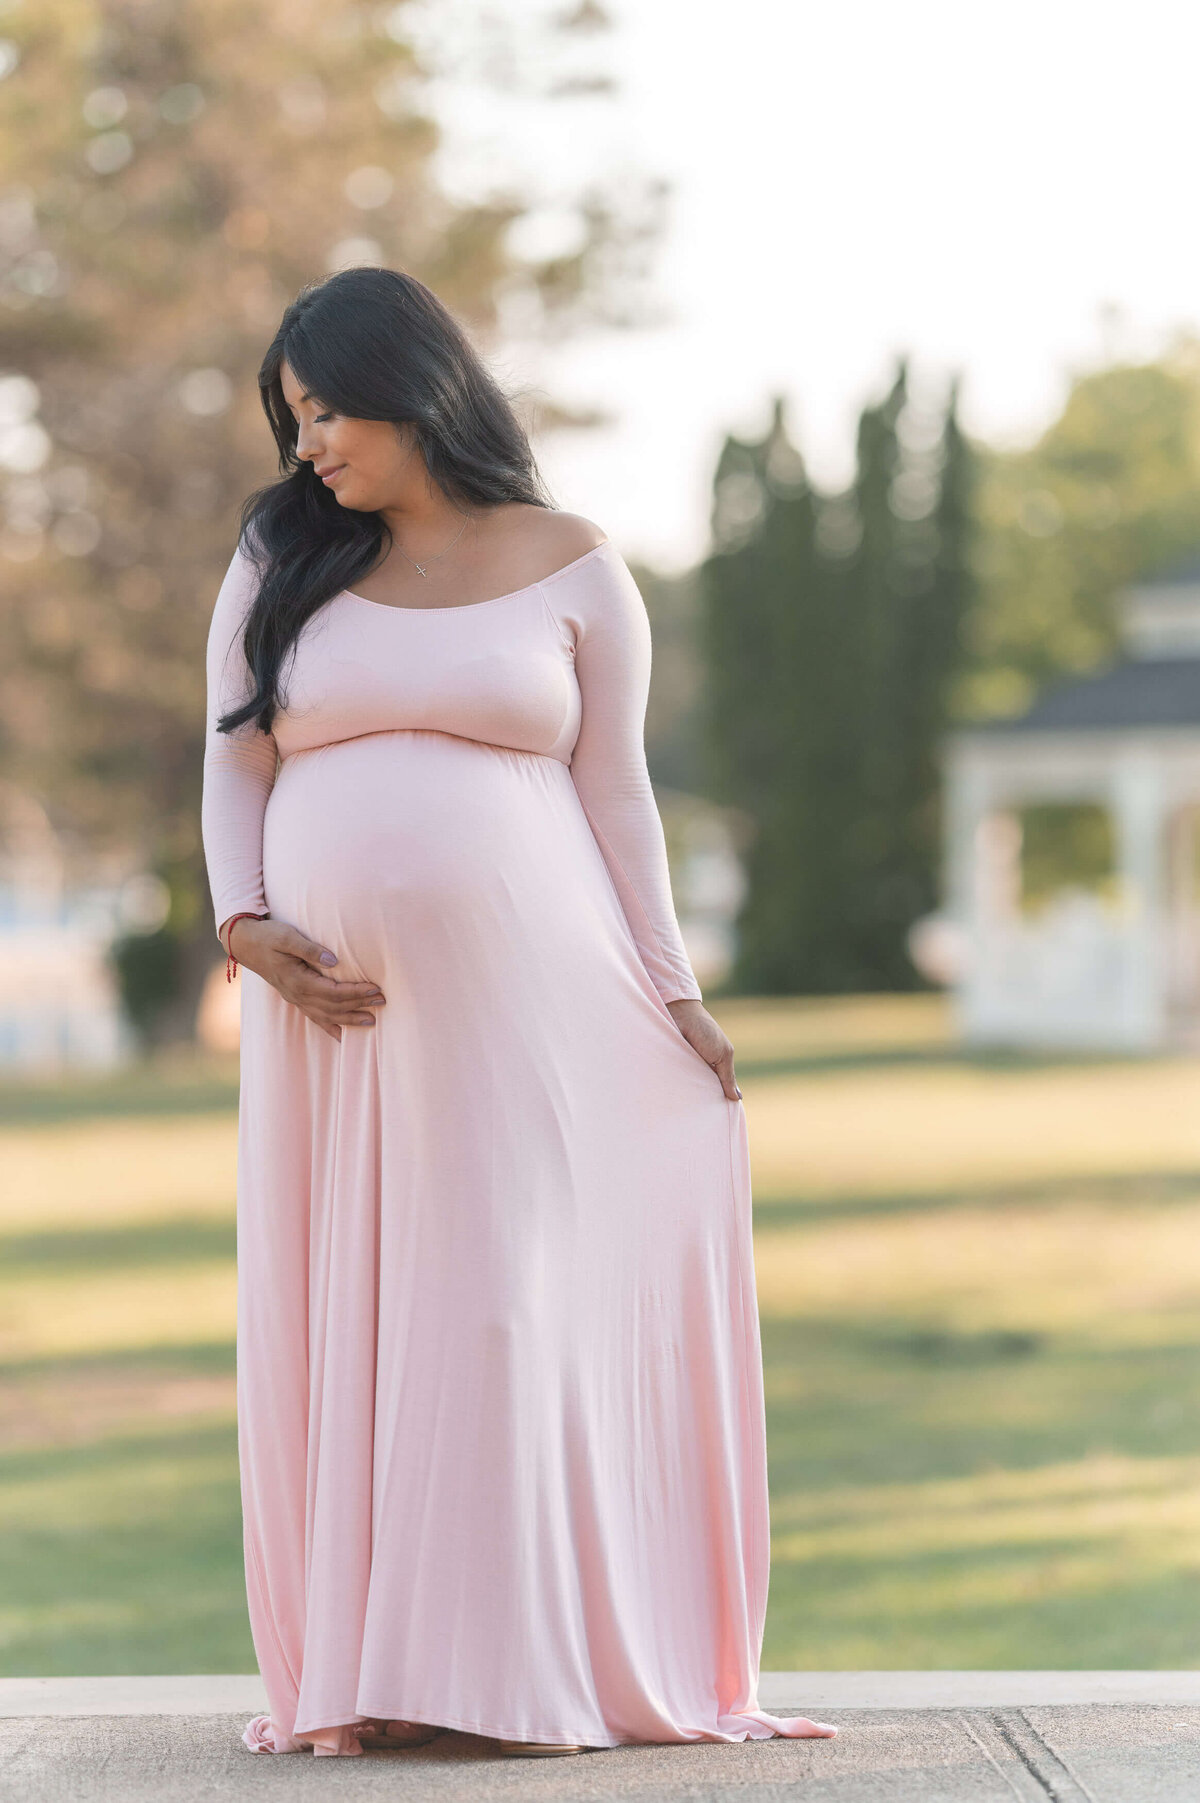 pink maternity dress on a beautiful mom standing on a plataform smealing her long dark hair